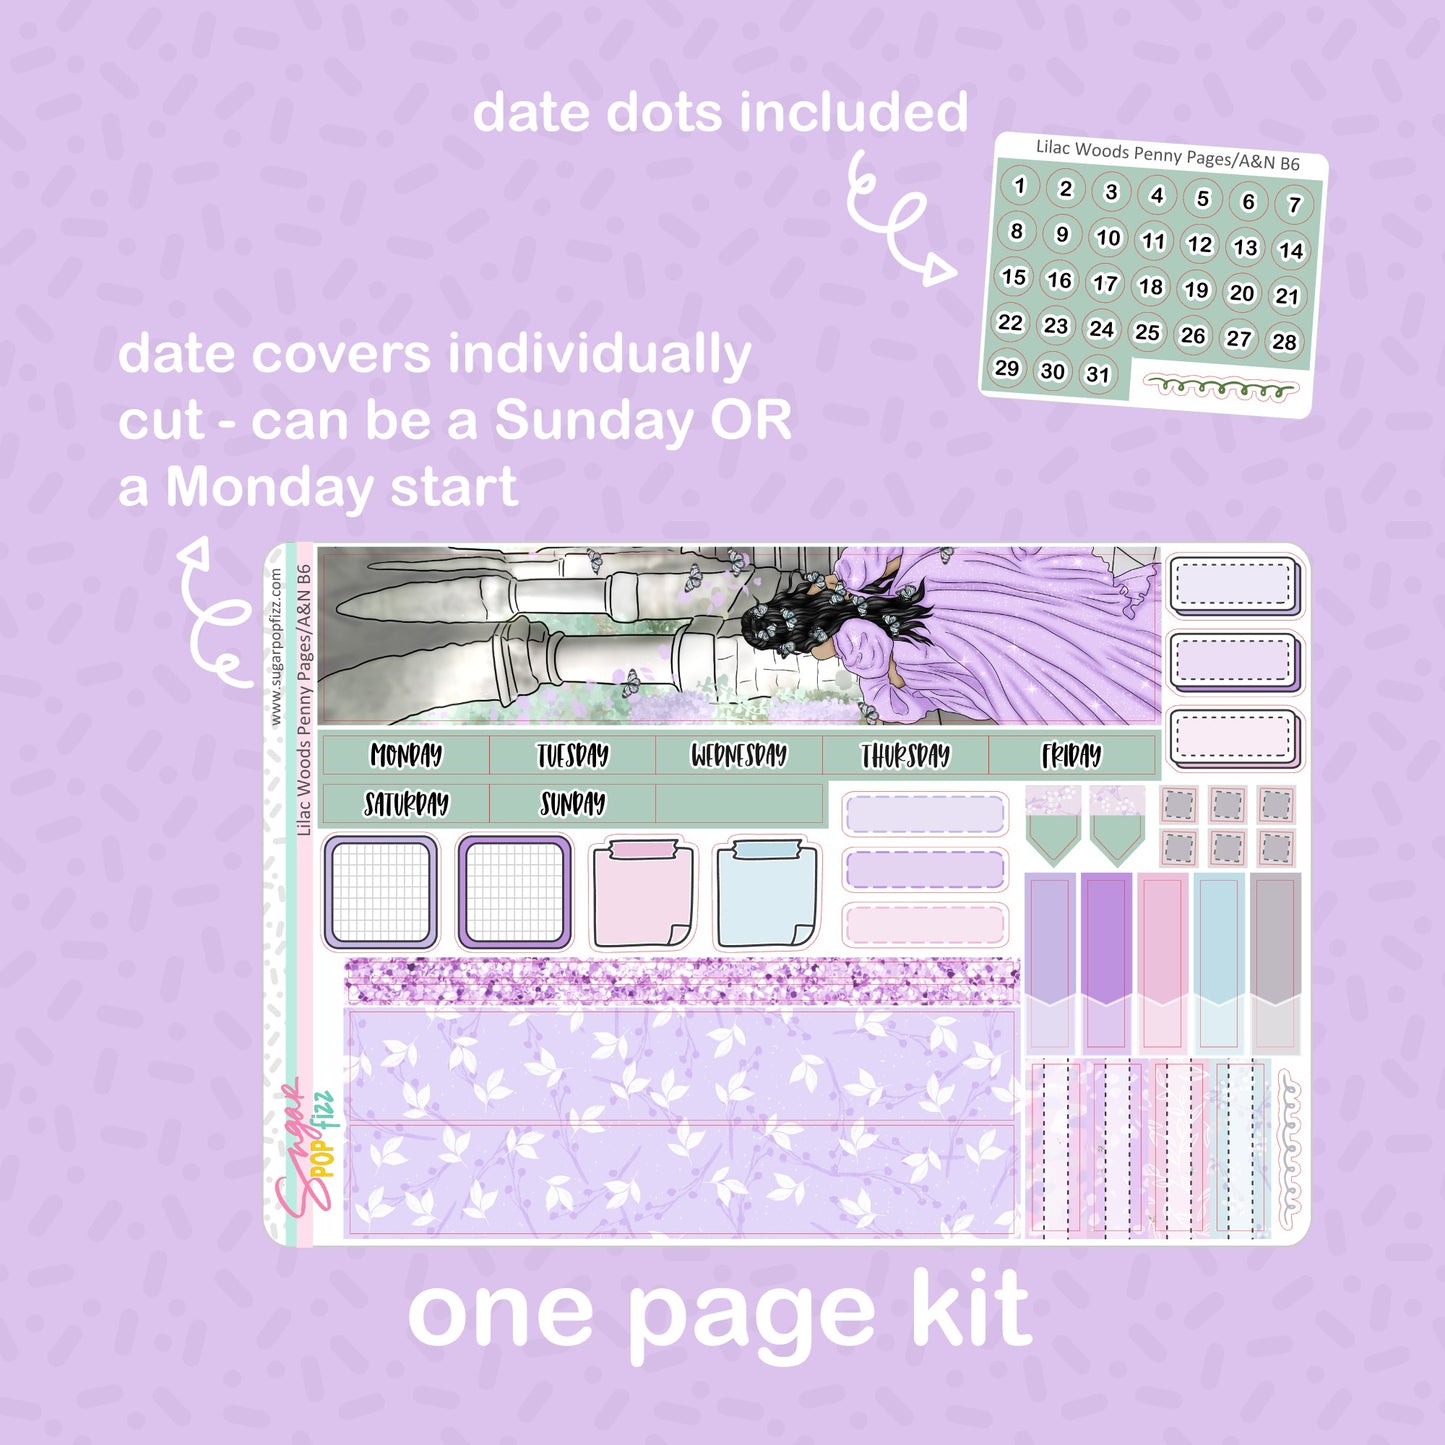 Lilac Woods B6 Monthly - Penny Pages/Avalon & Ninth